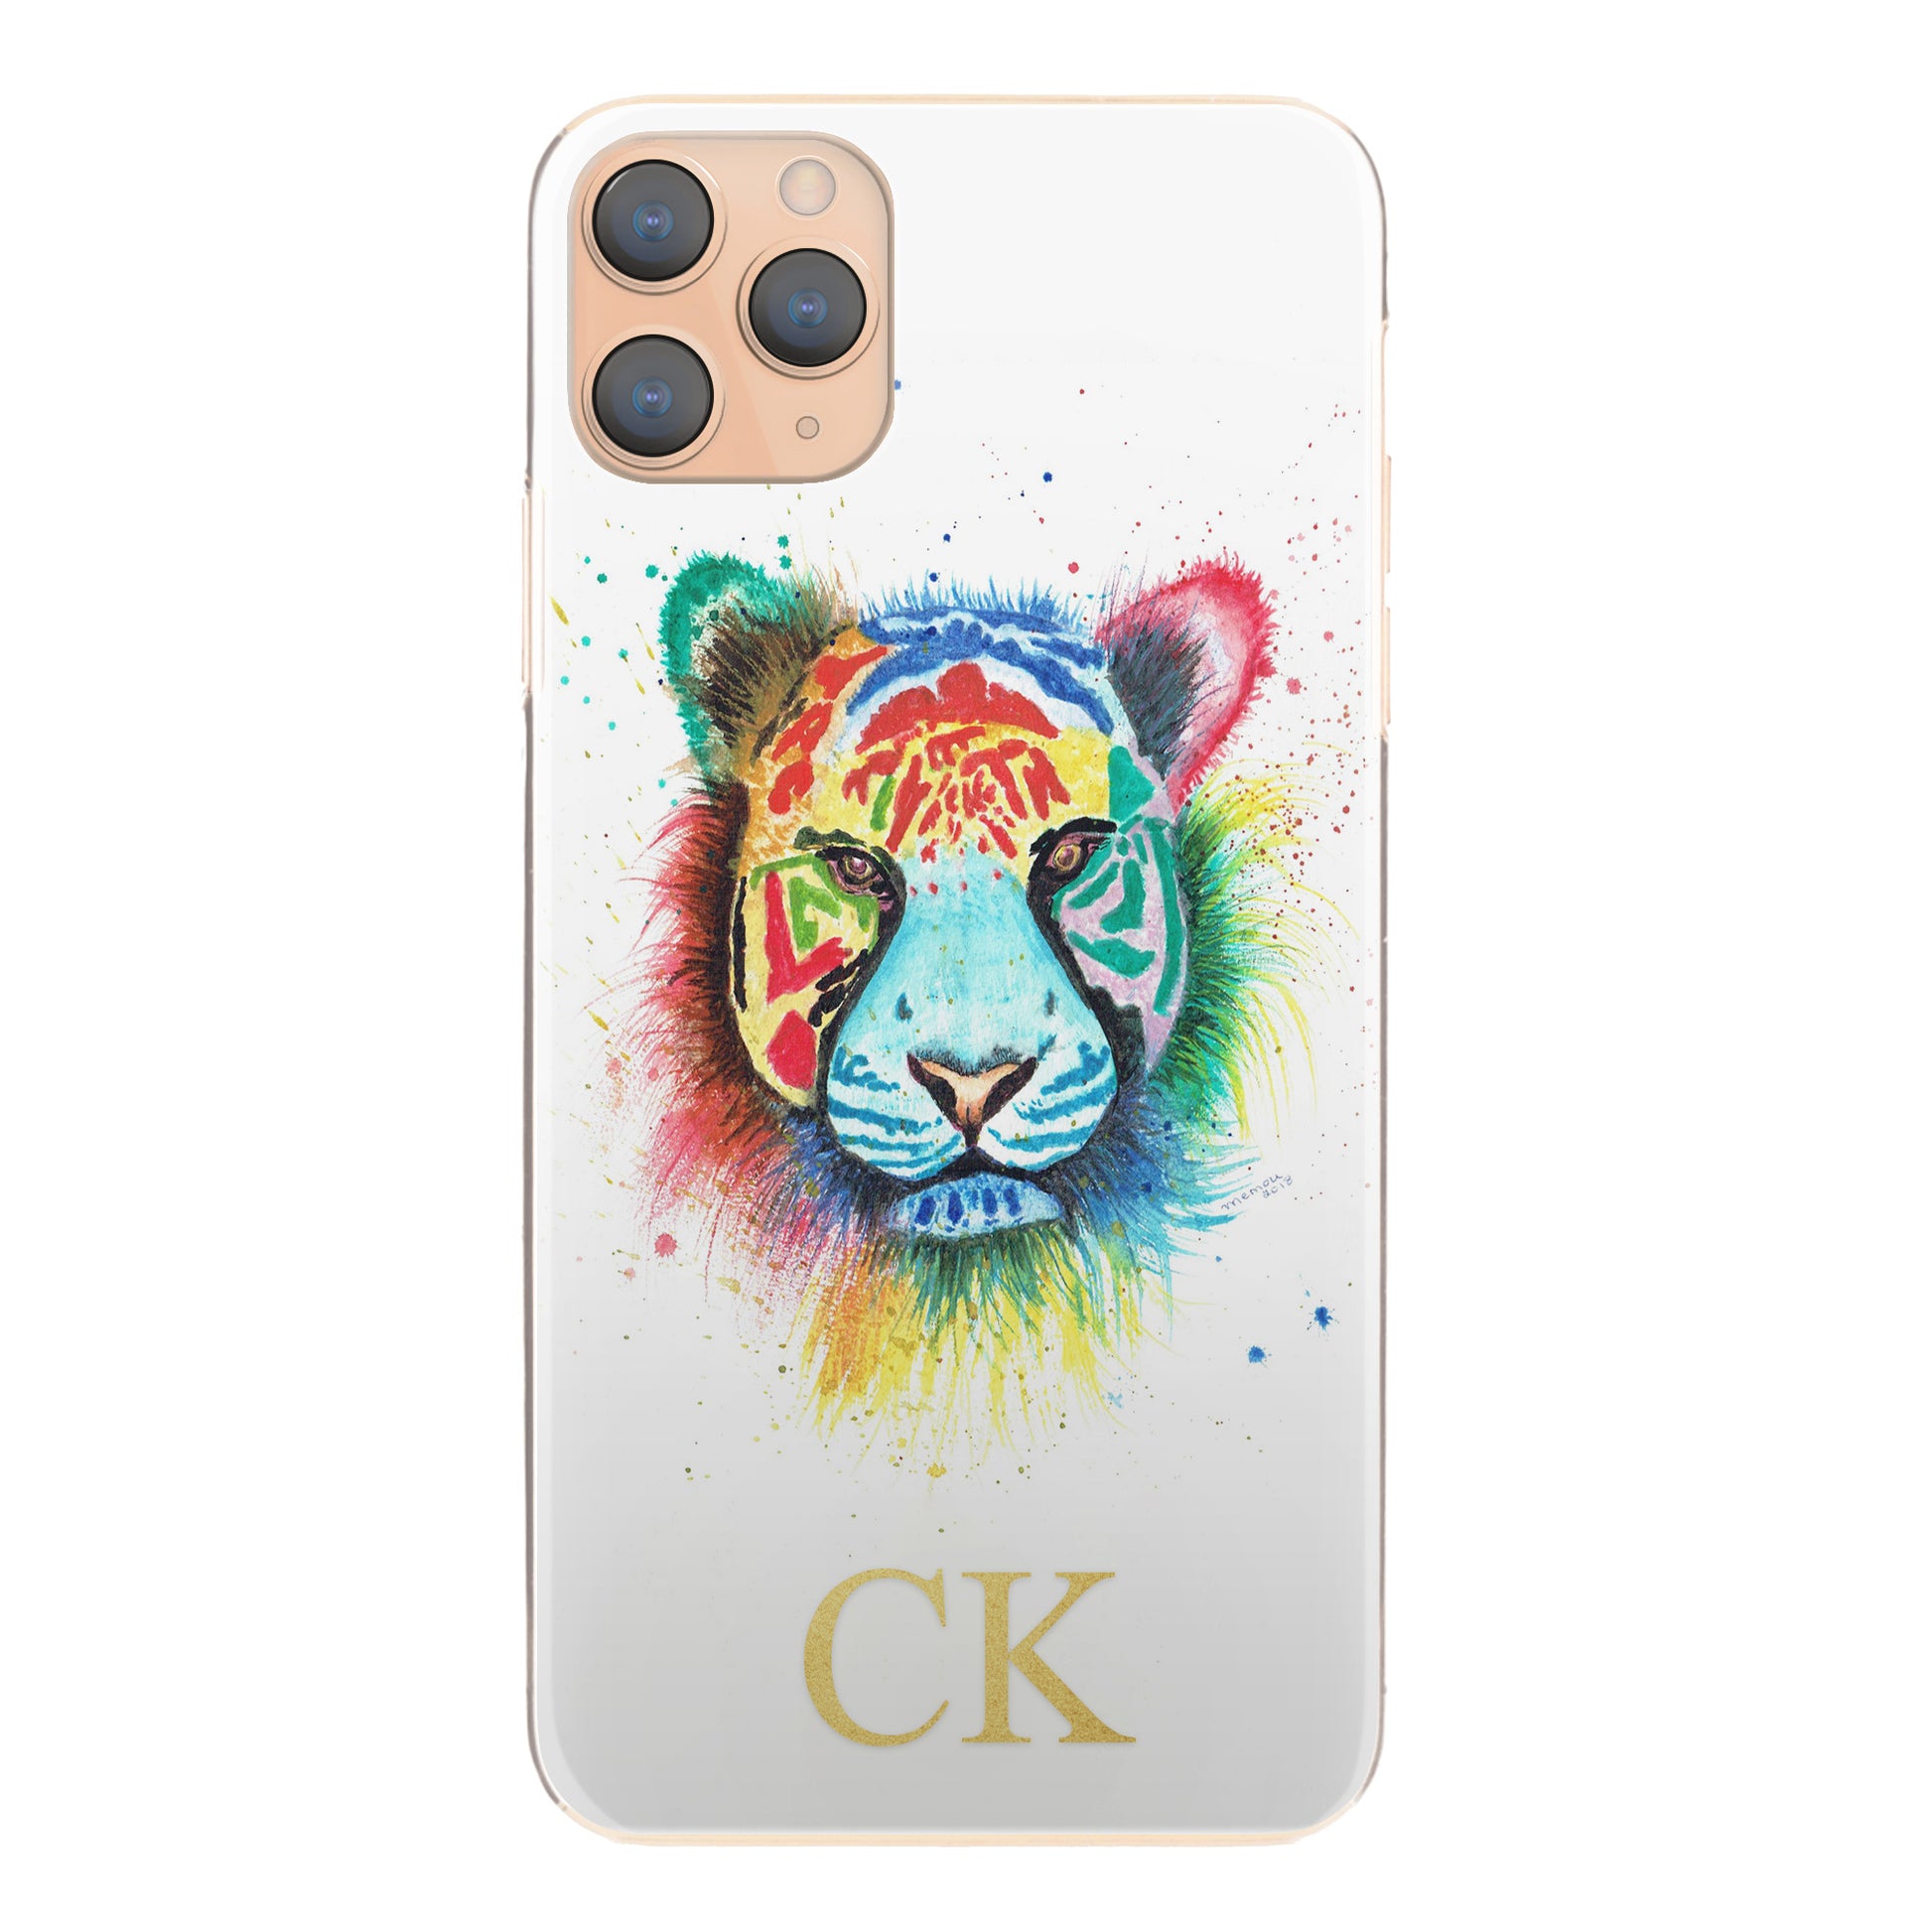 Personalised Google Phone Hard Case with Rainbow Tiger and Gold Initials